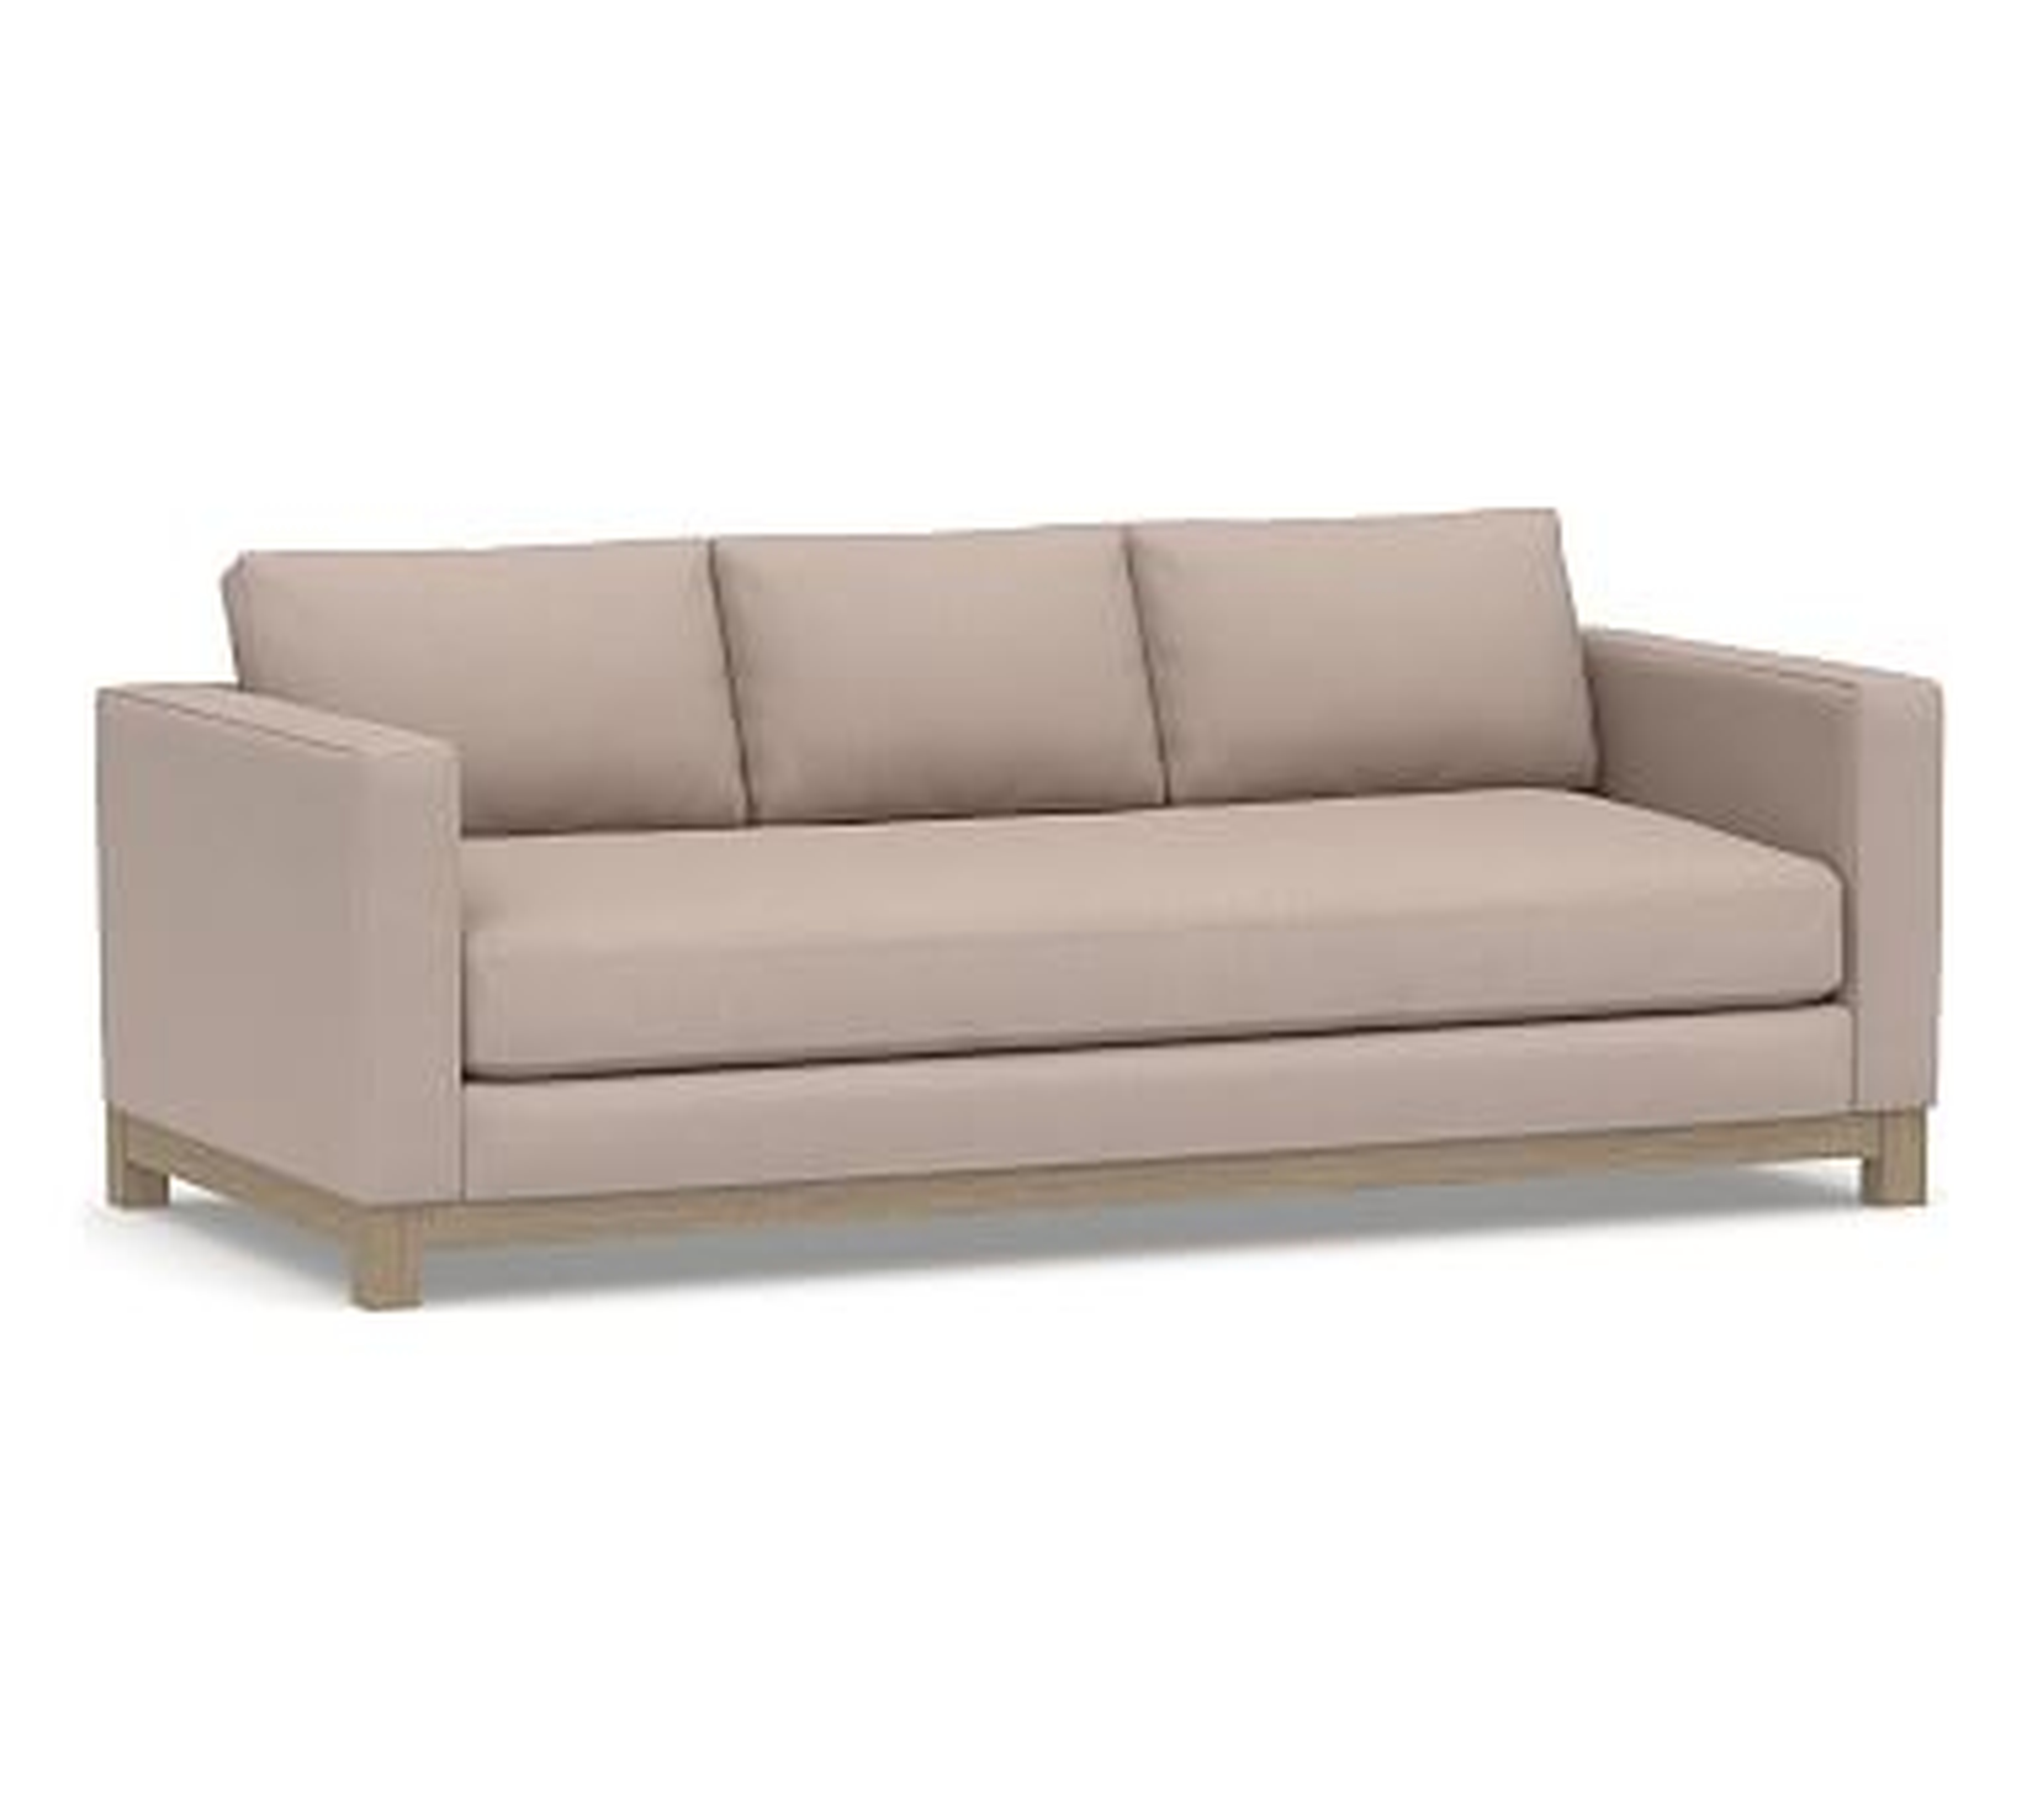 Jake Upholstered Sofa 85" with Wood Legs, Polyester Wrapped Cushions, Performance Heathered Tweed Desert - Pottery Barn